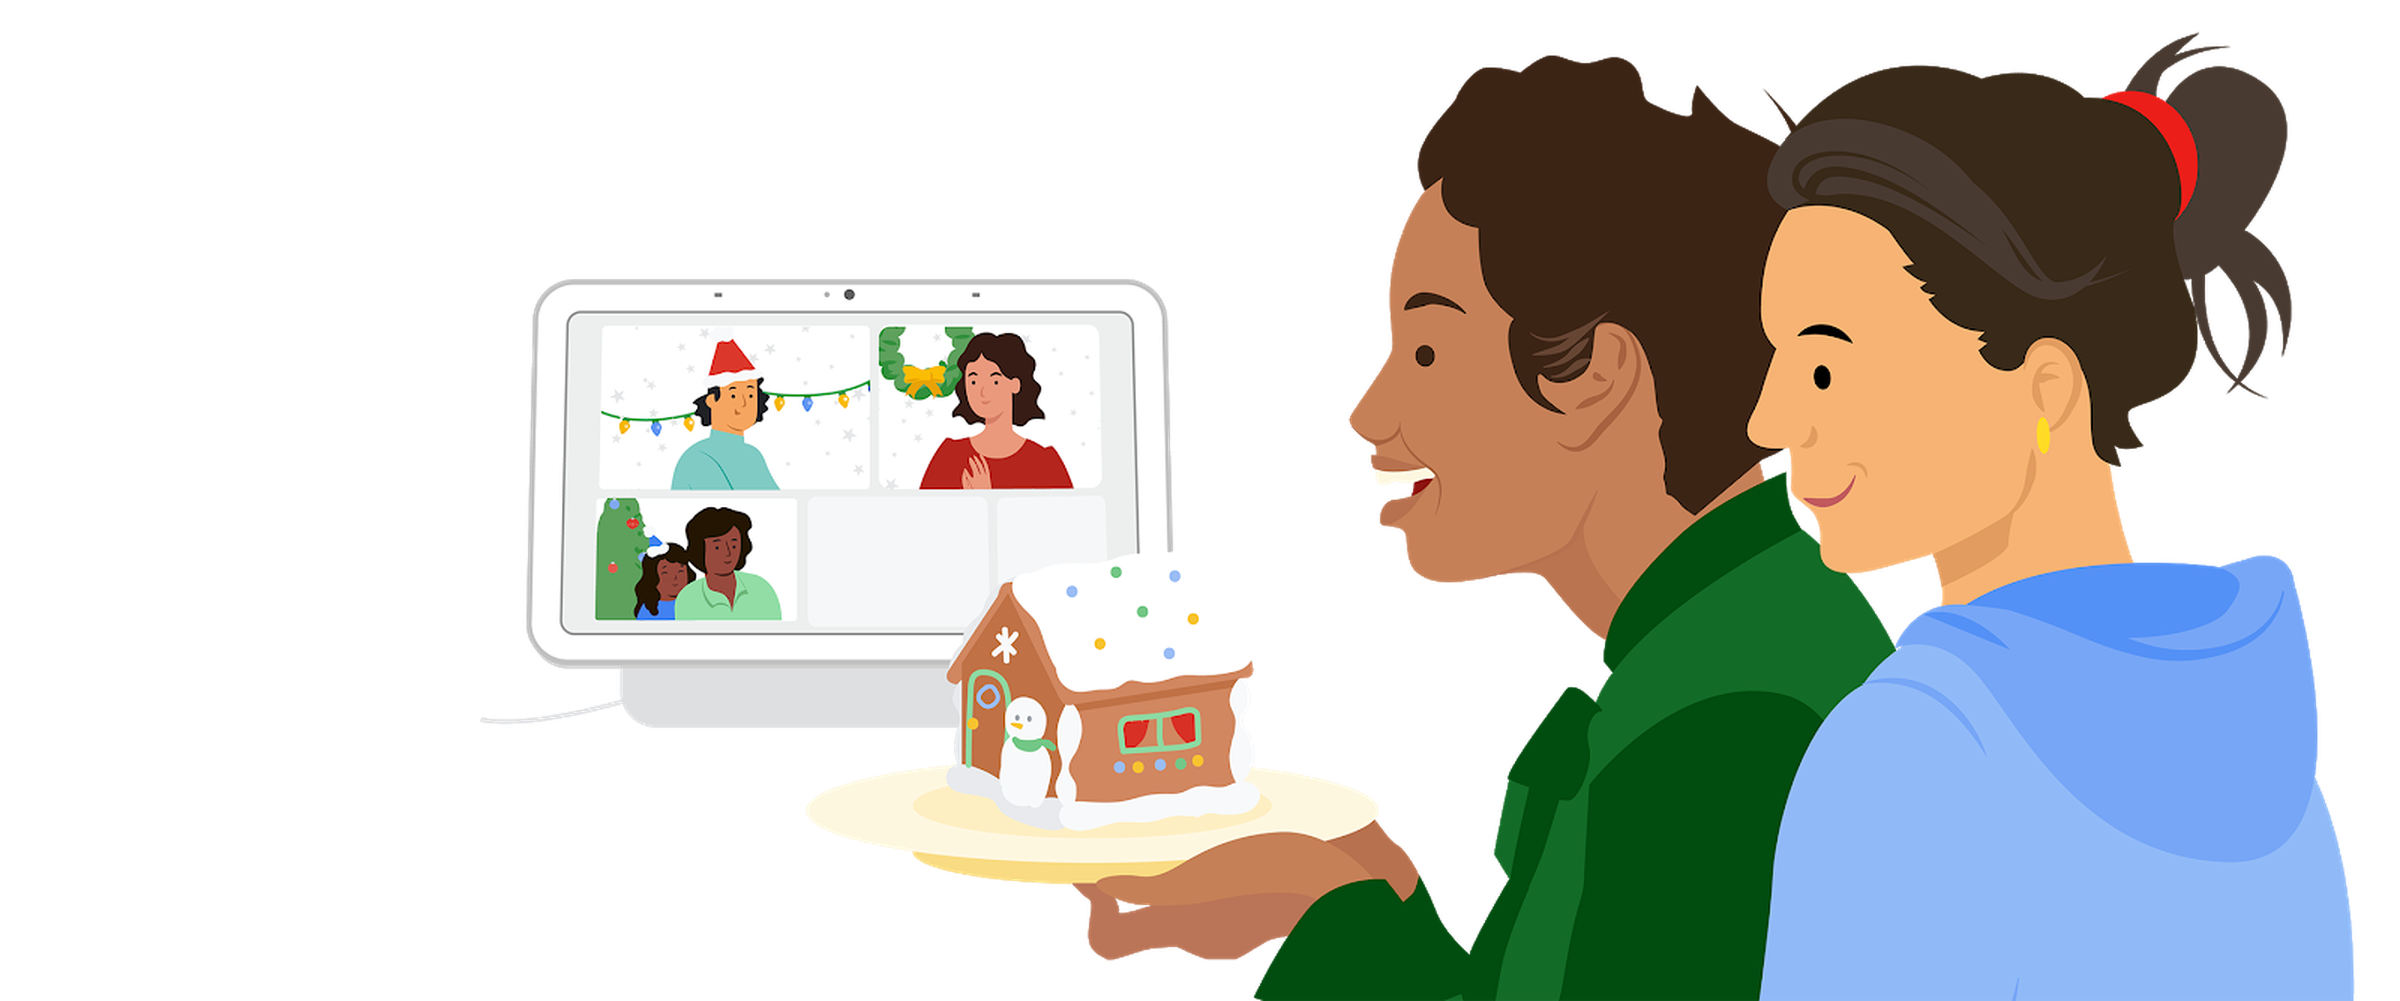 Two people showing off a gingerbread house using their Google Nest Hub Max